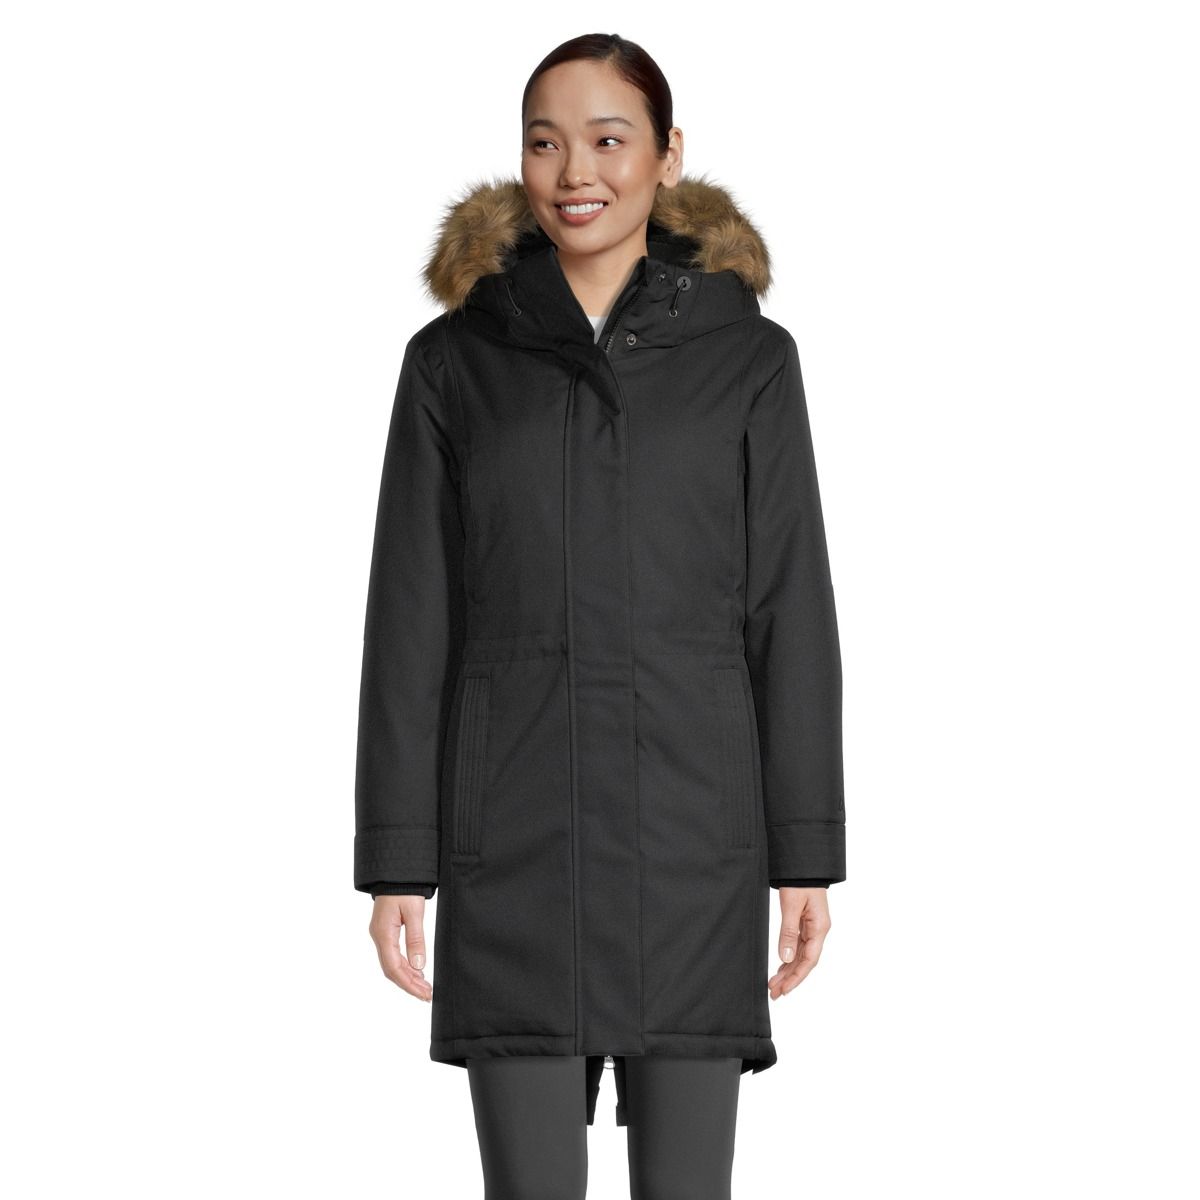 Ripzone Women's Clearwater Insulated Parka